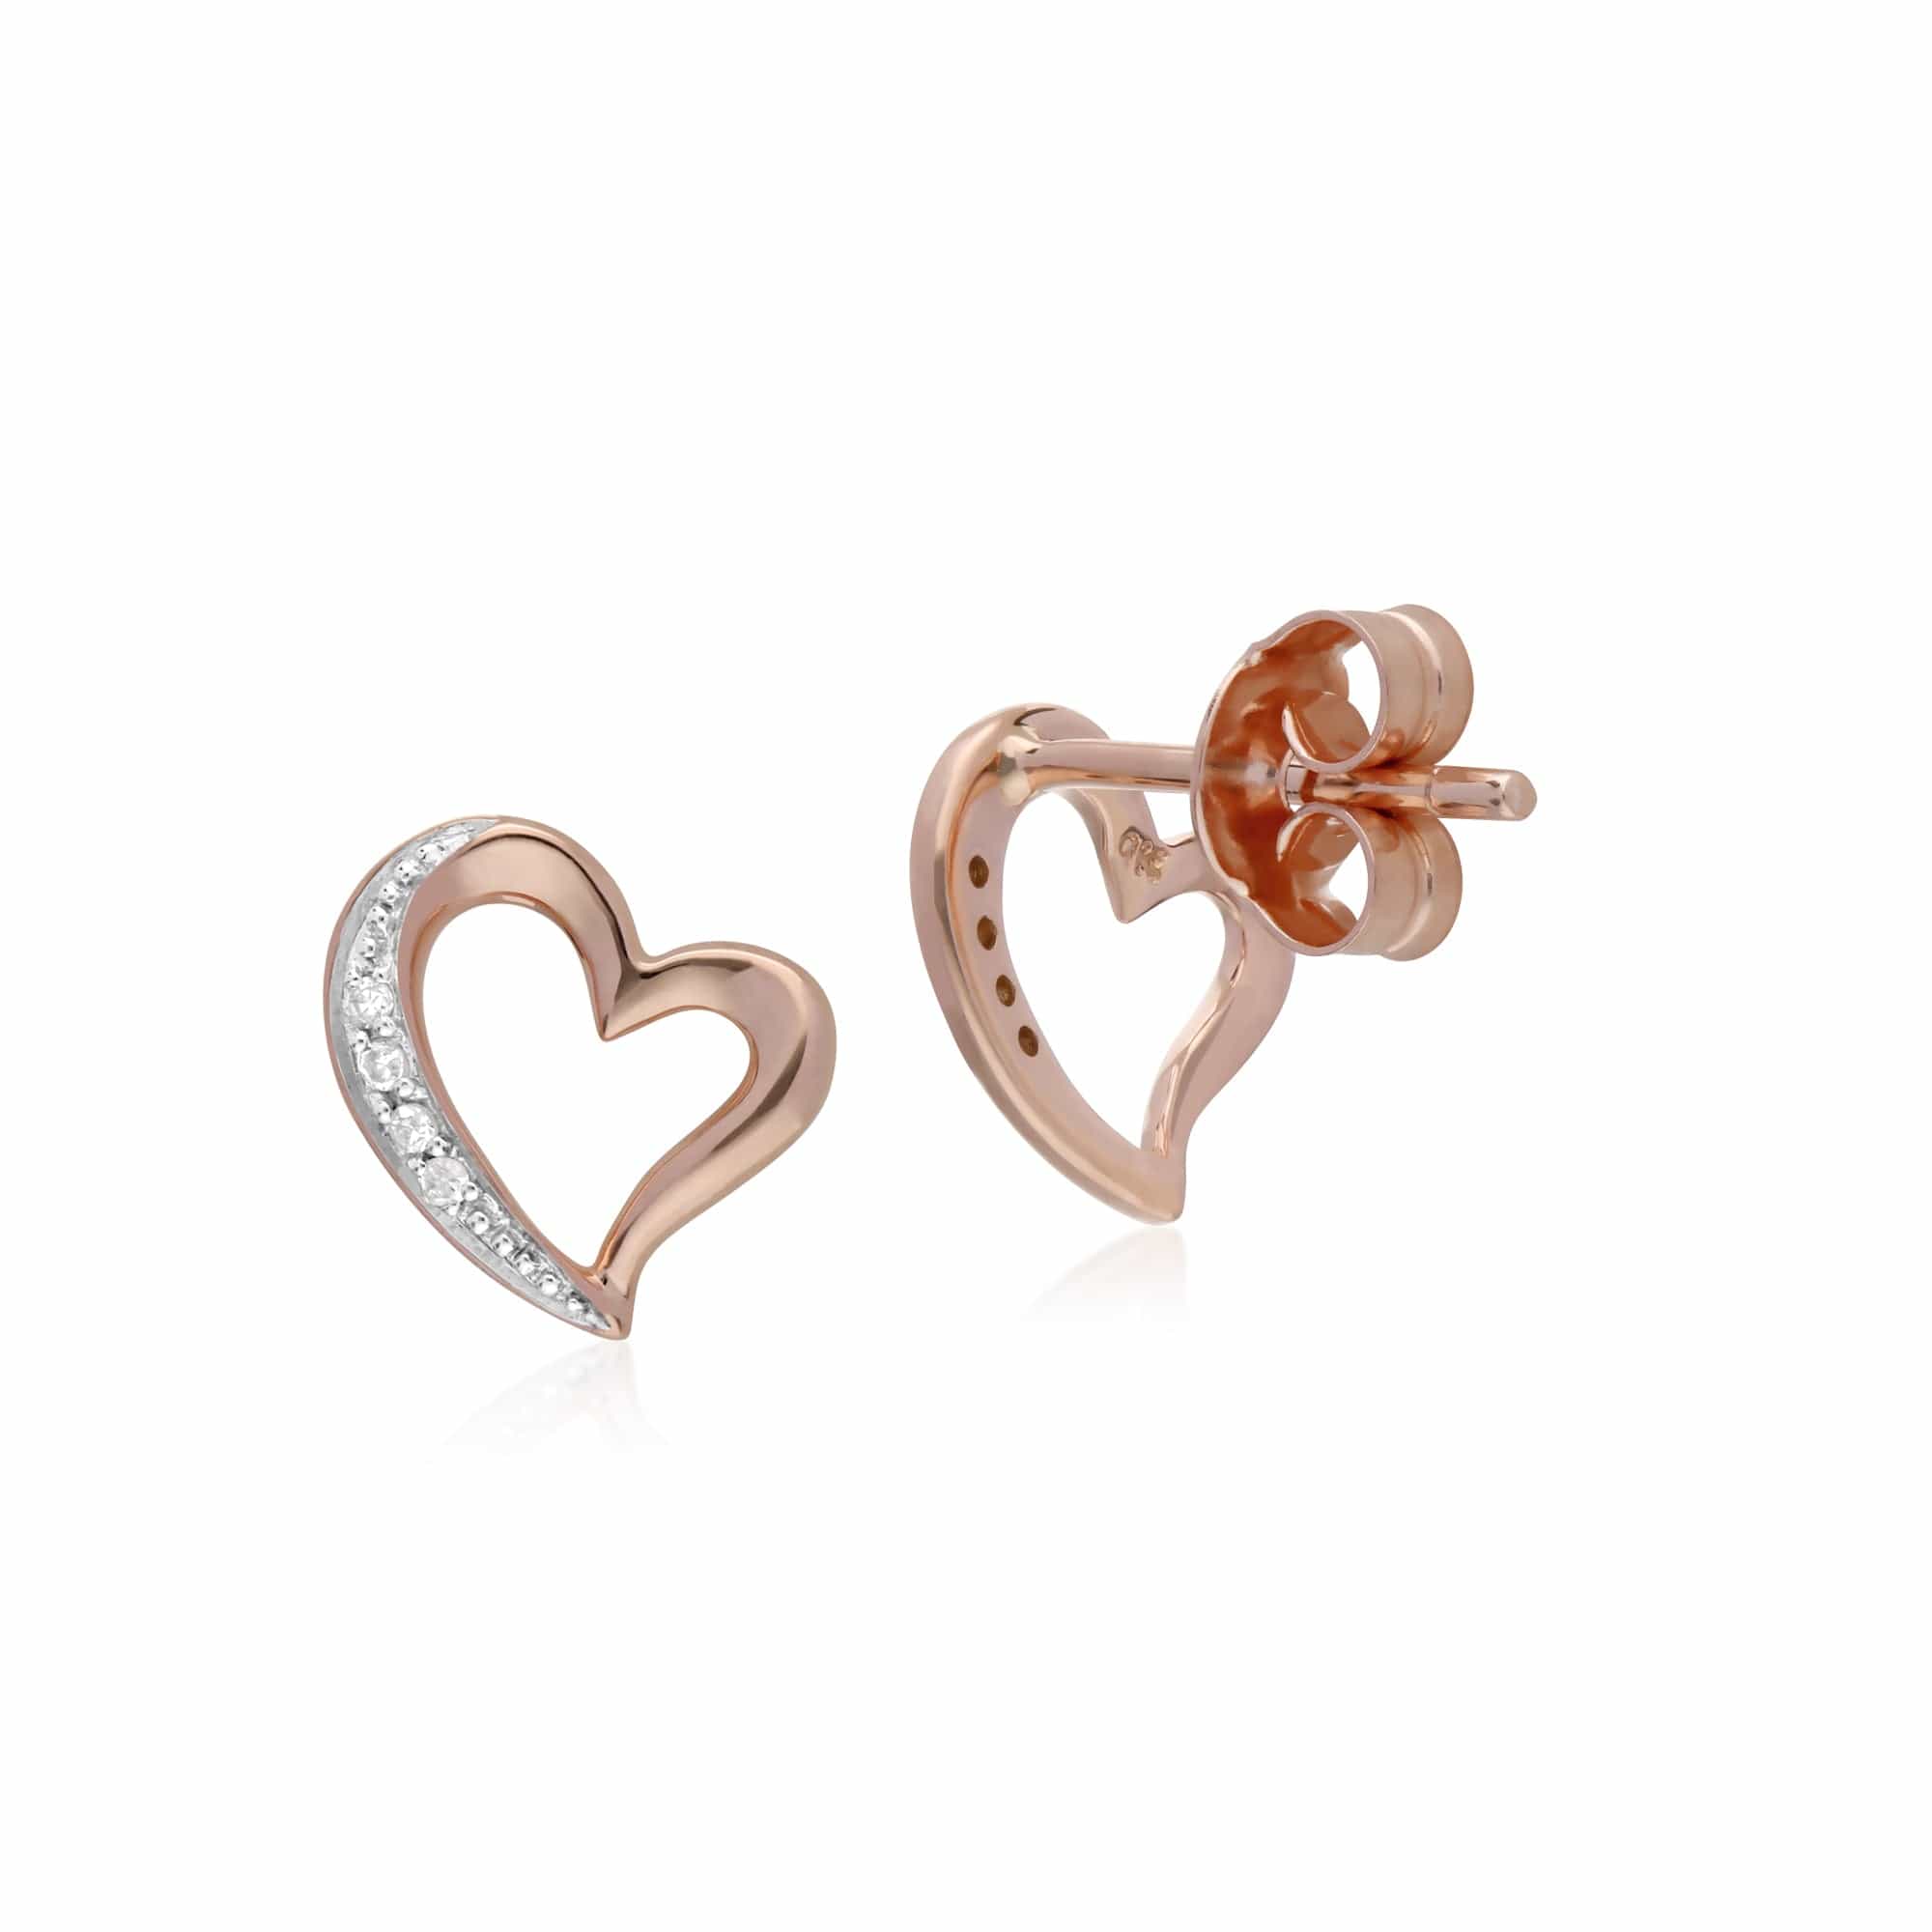 191E0386019 Classic Round Diamond Open Love Heart Stud Earrings in 9ct Rose Gold 2